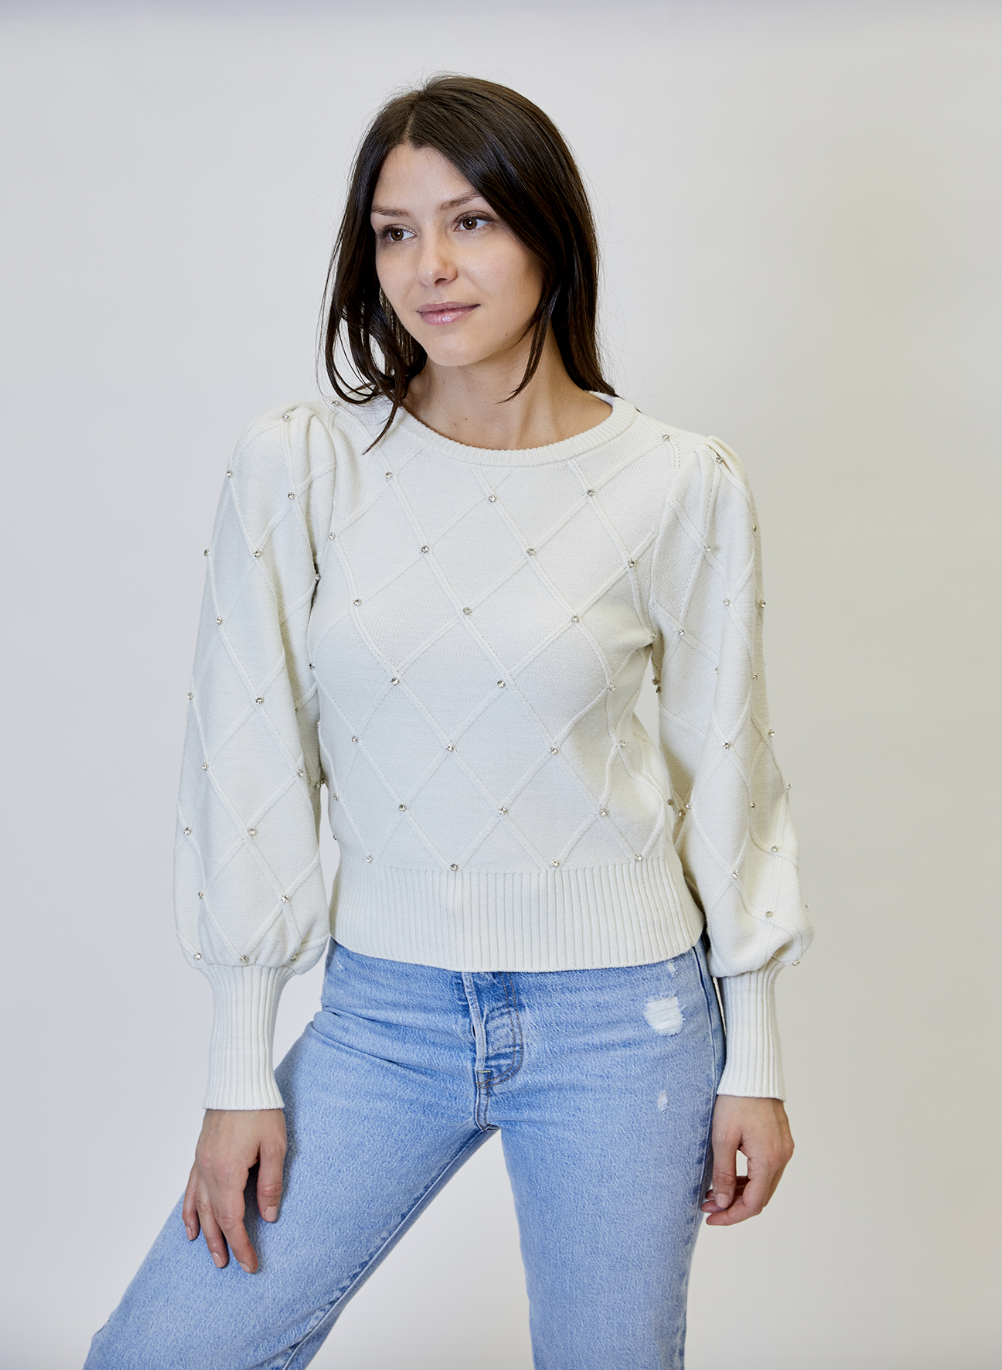 Studded Winter White Sweater